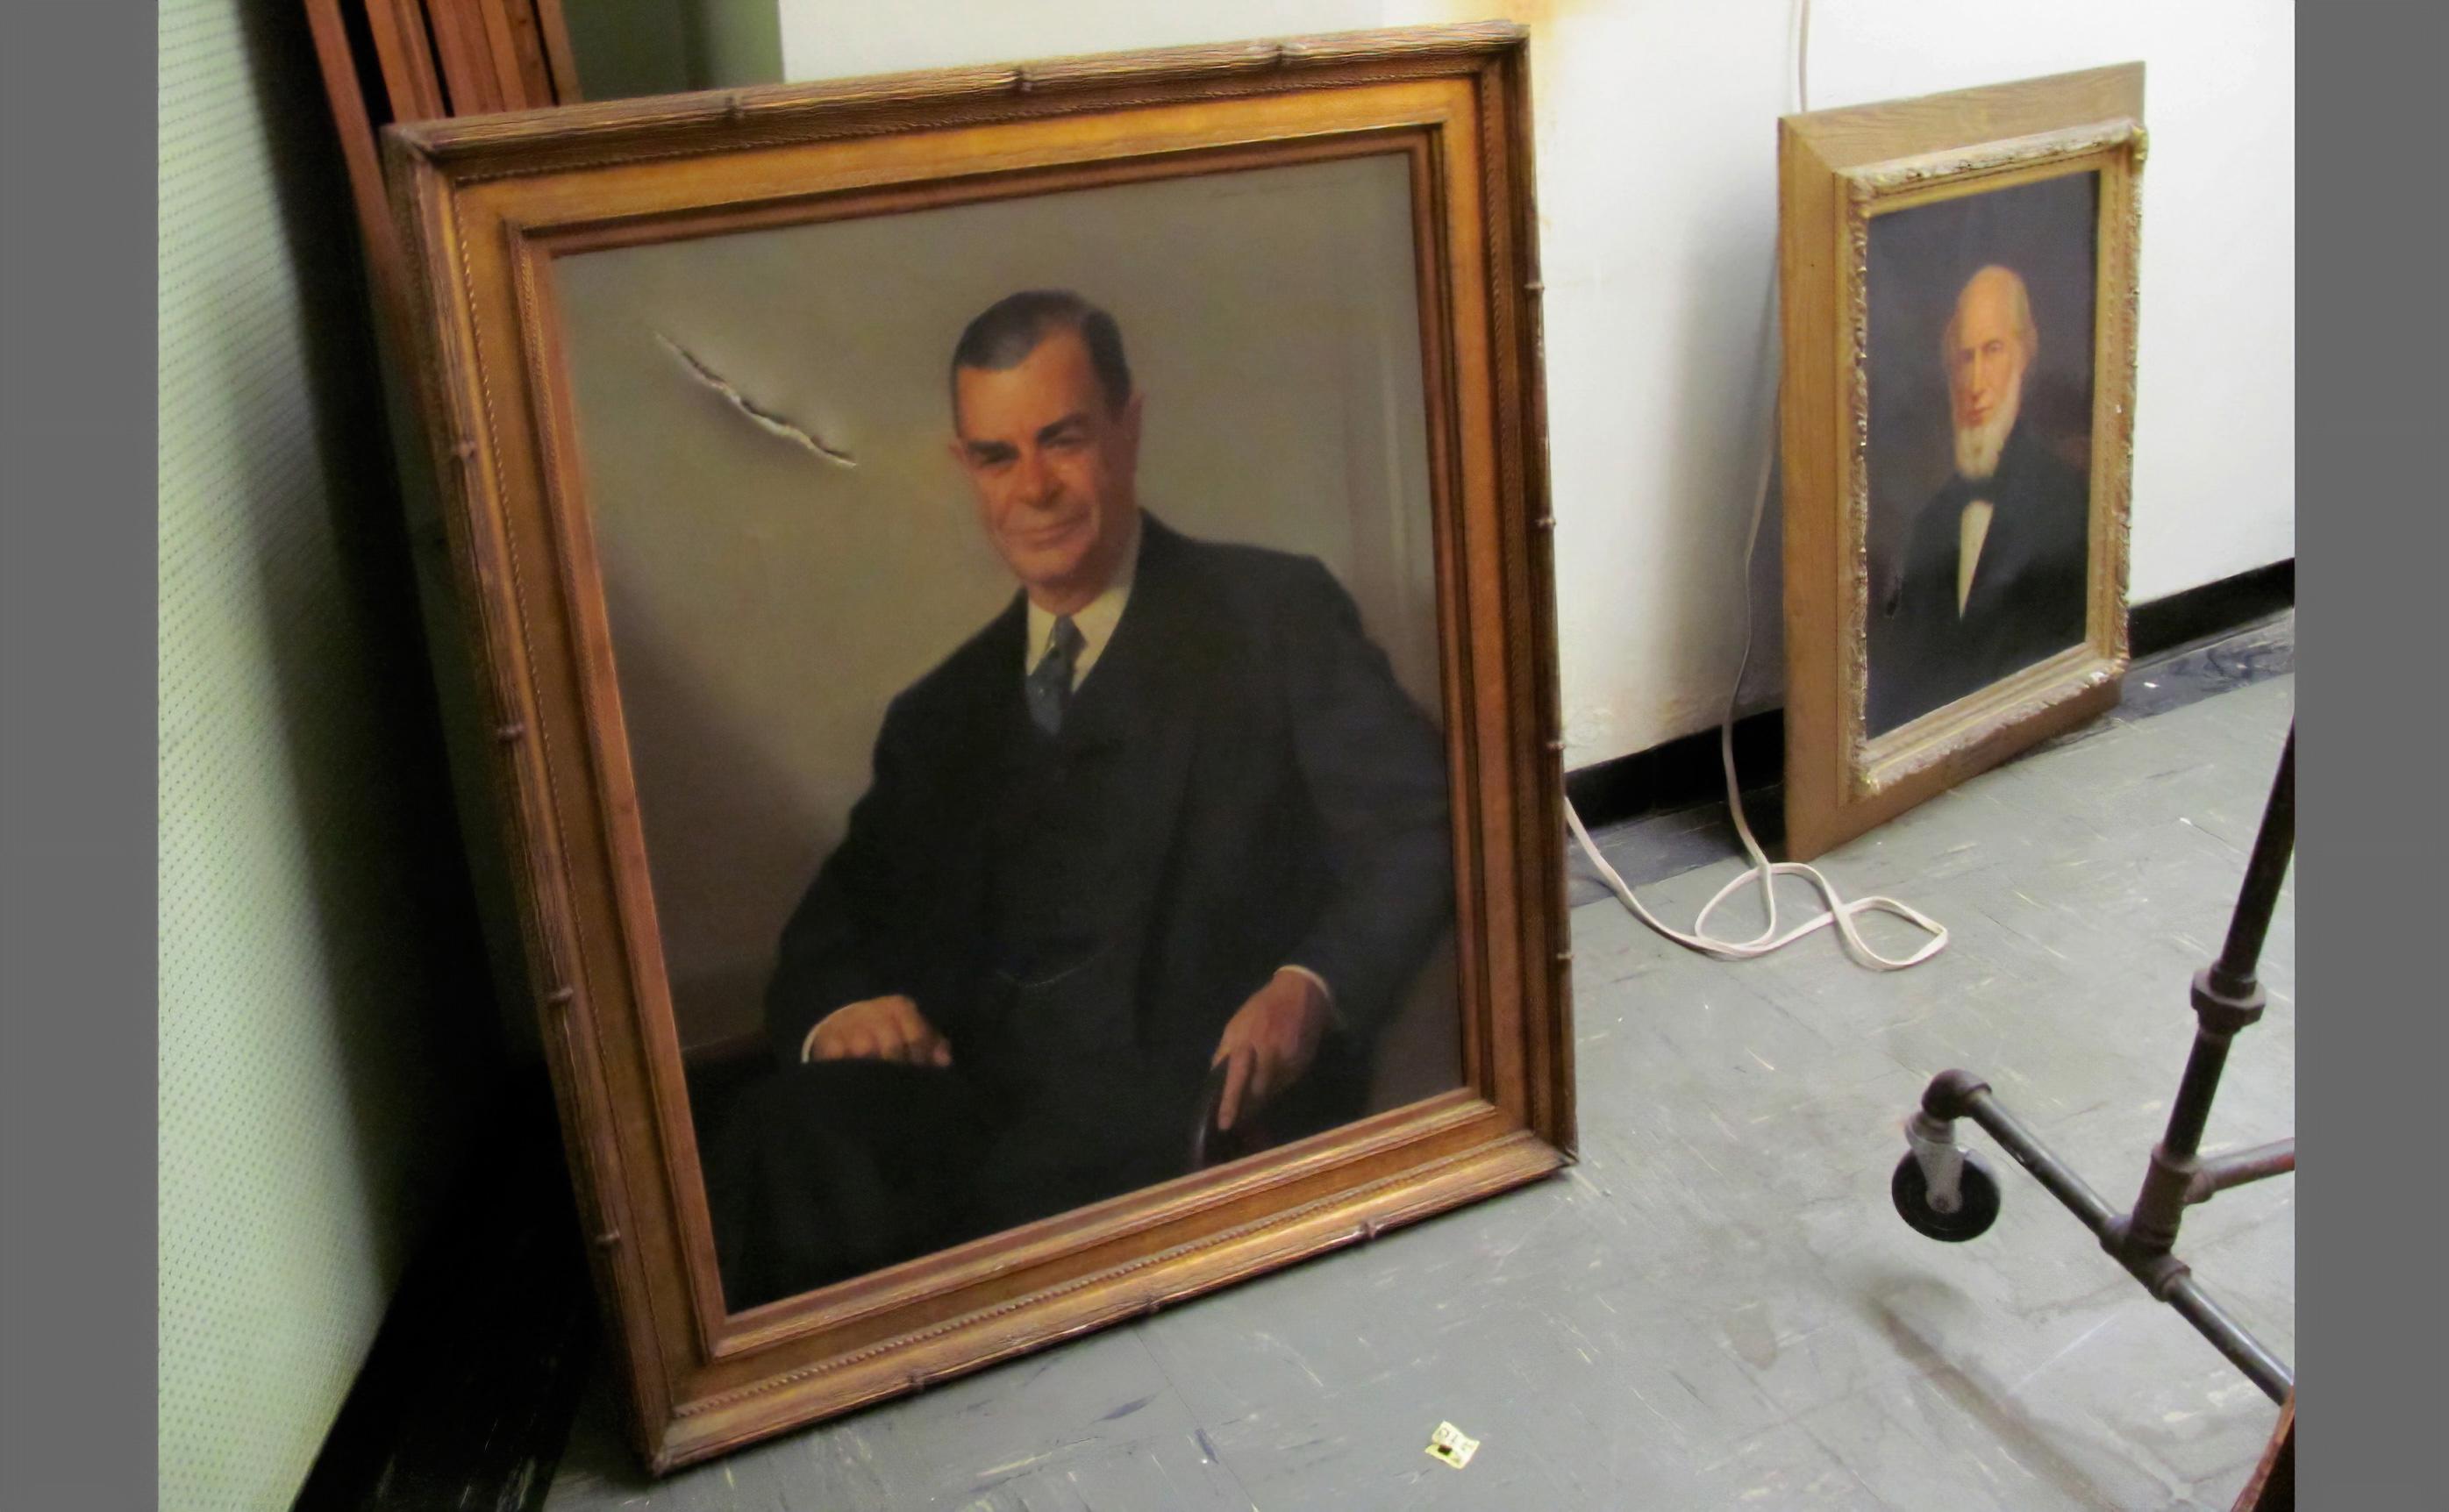 Portraits of Benjamin Strong and Fisher Howe as found in storage room at Union Theological Seminary, New York, 2012